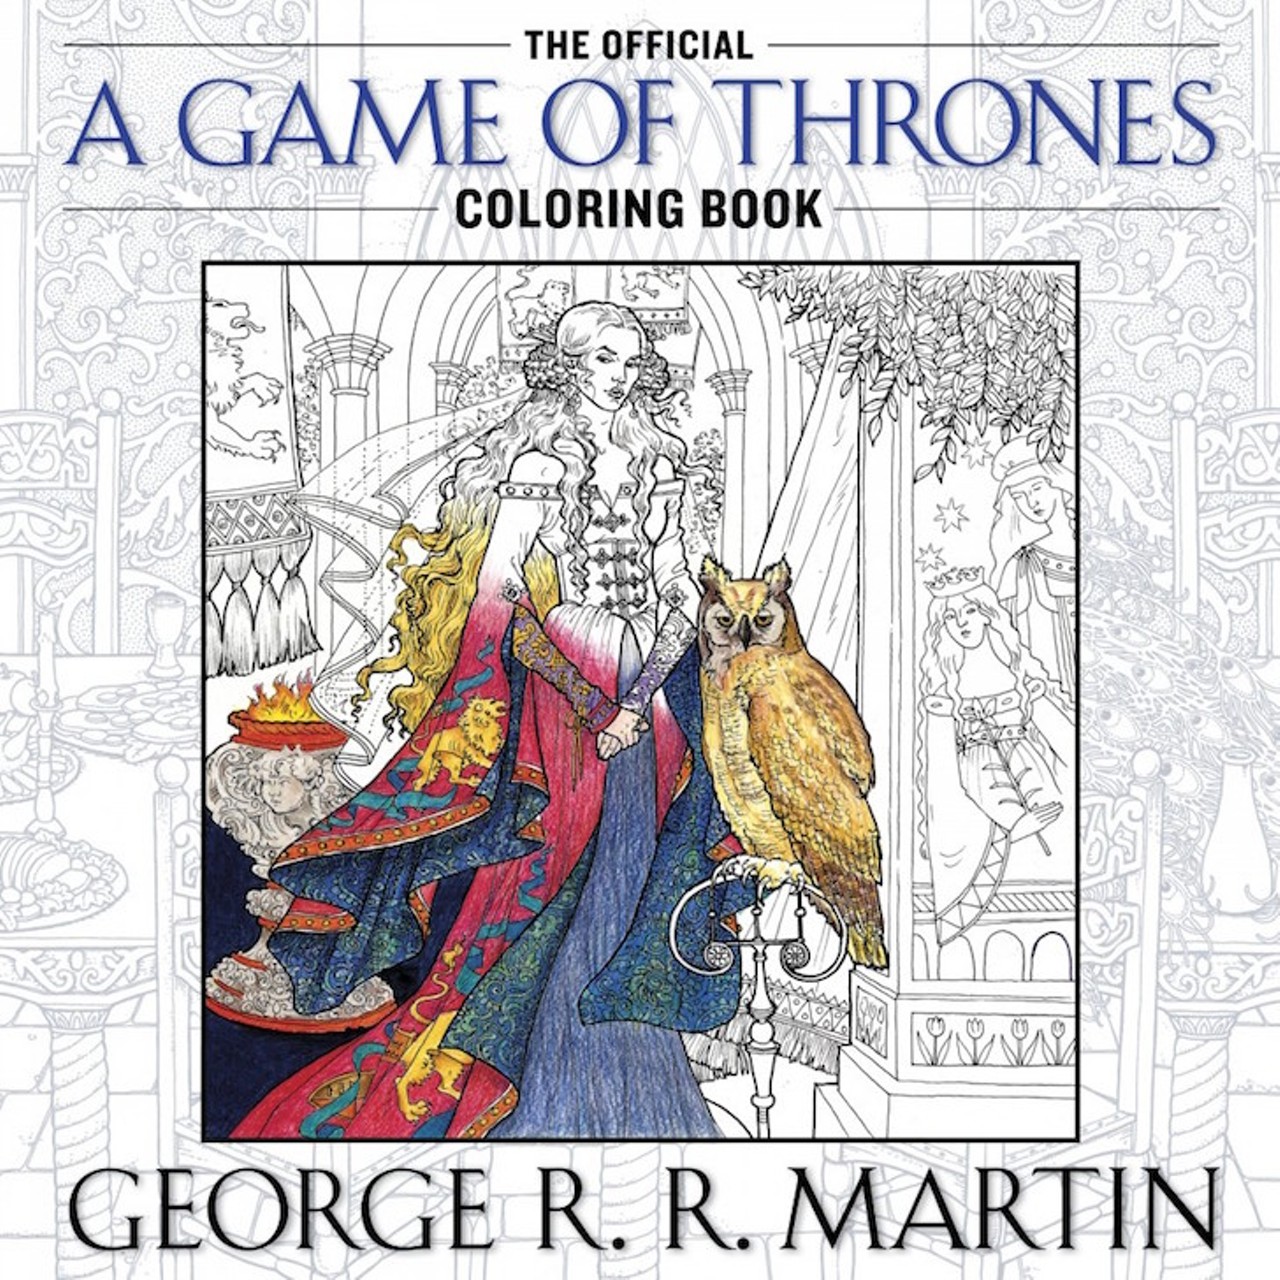  The Official A Game of Thrones Coloring Book (A Song of Ice and Fire)
You&#146;ll have to find the right shade of pinkish-red to color in Tyrion&#146;s scar.
Buy it at amazon.com 